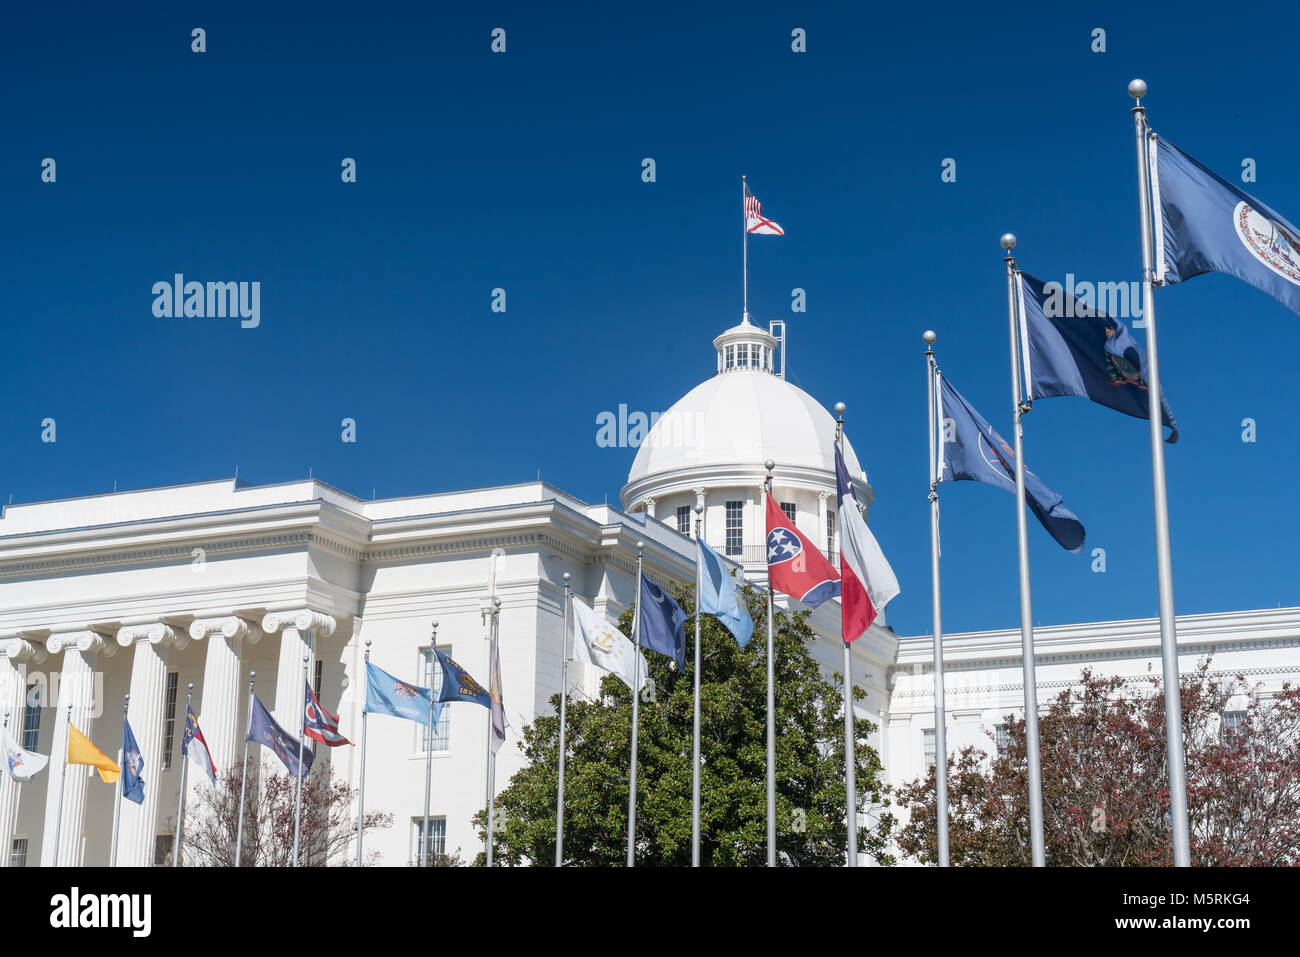 State Flags at the Alabama State Capitol Building in Montgomery, Alabama Stock Photo